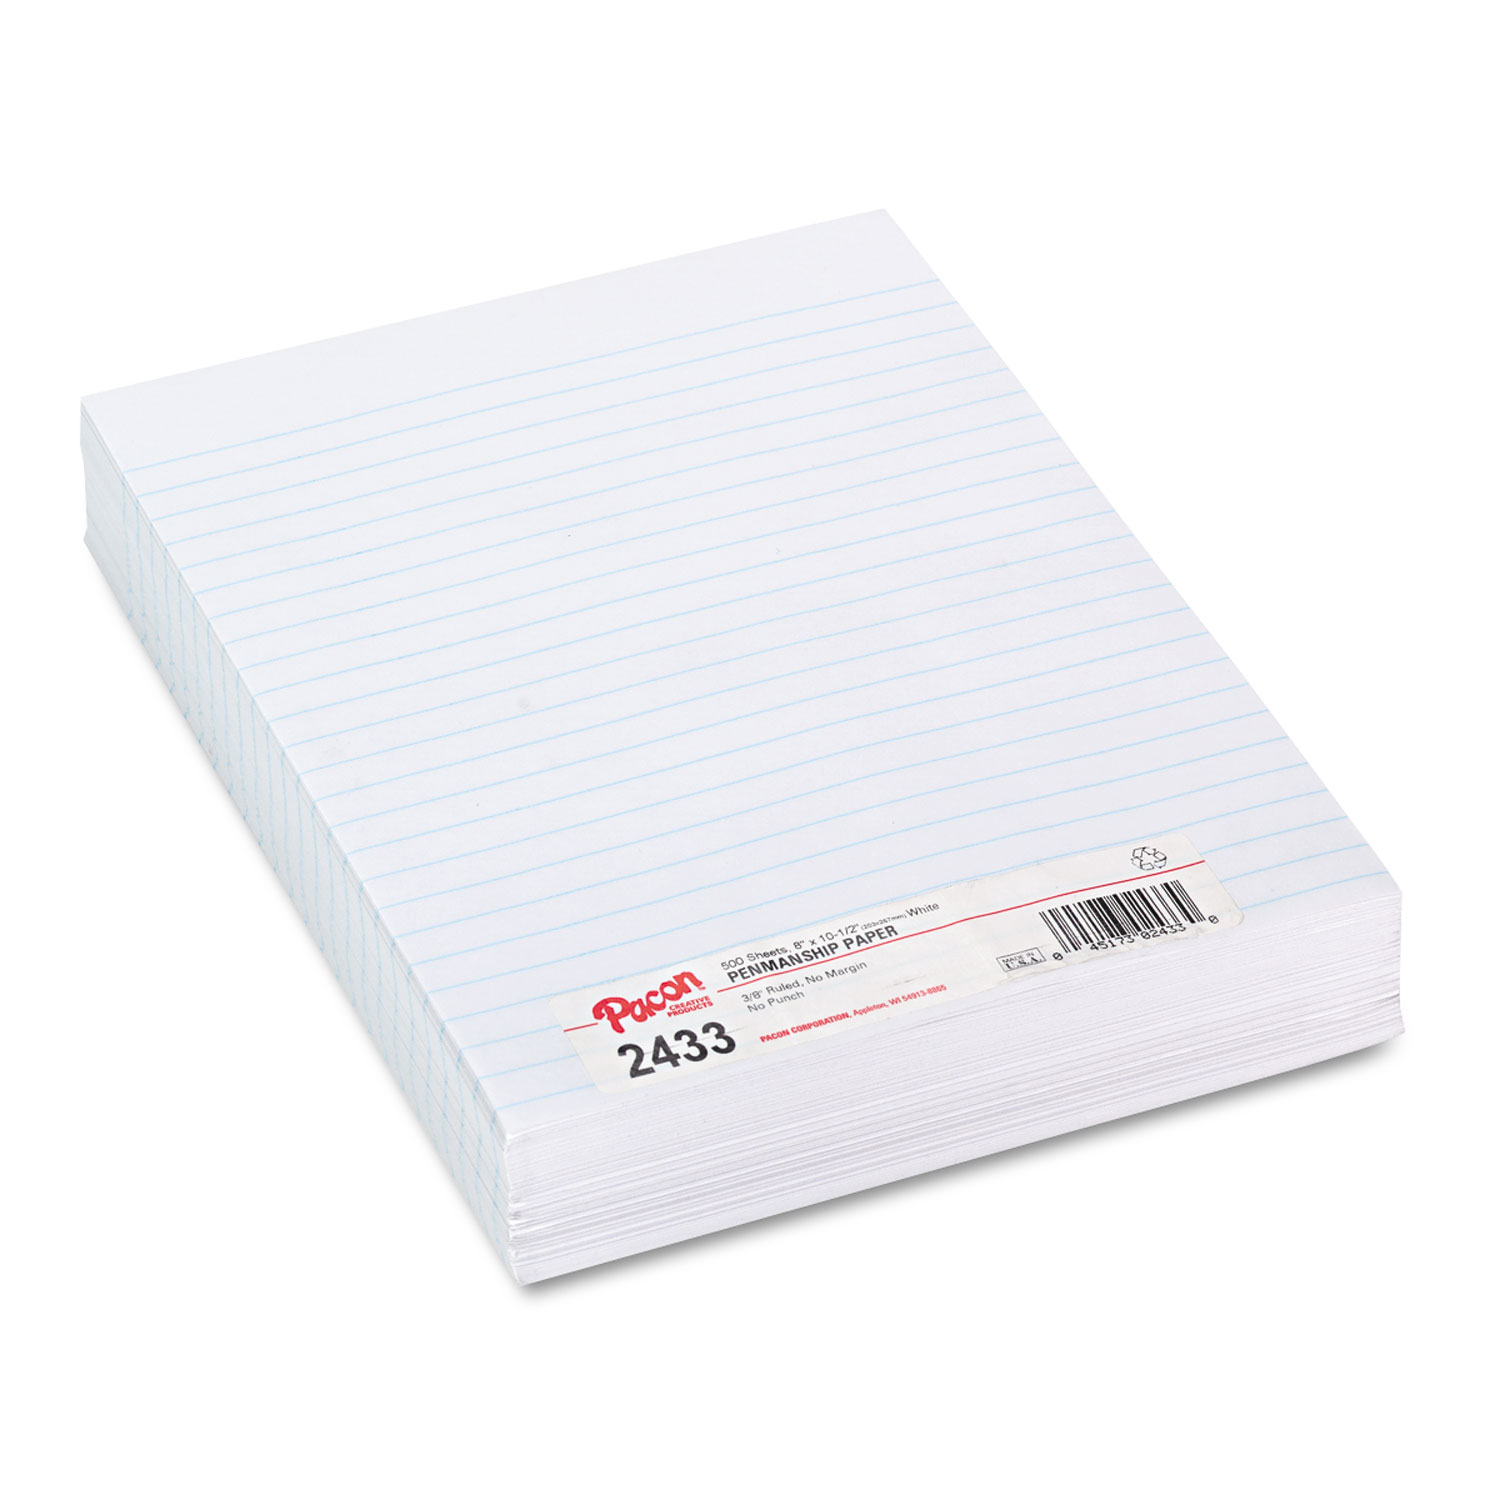  Pacon 2433 Composition Paper, 8 x 10.5, Wide/Legal Rule, 500/Pack (PAC2433) 